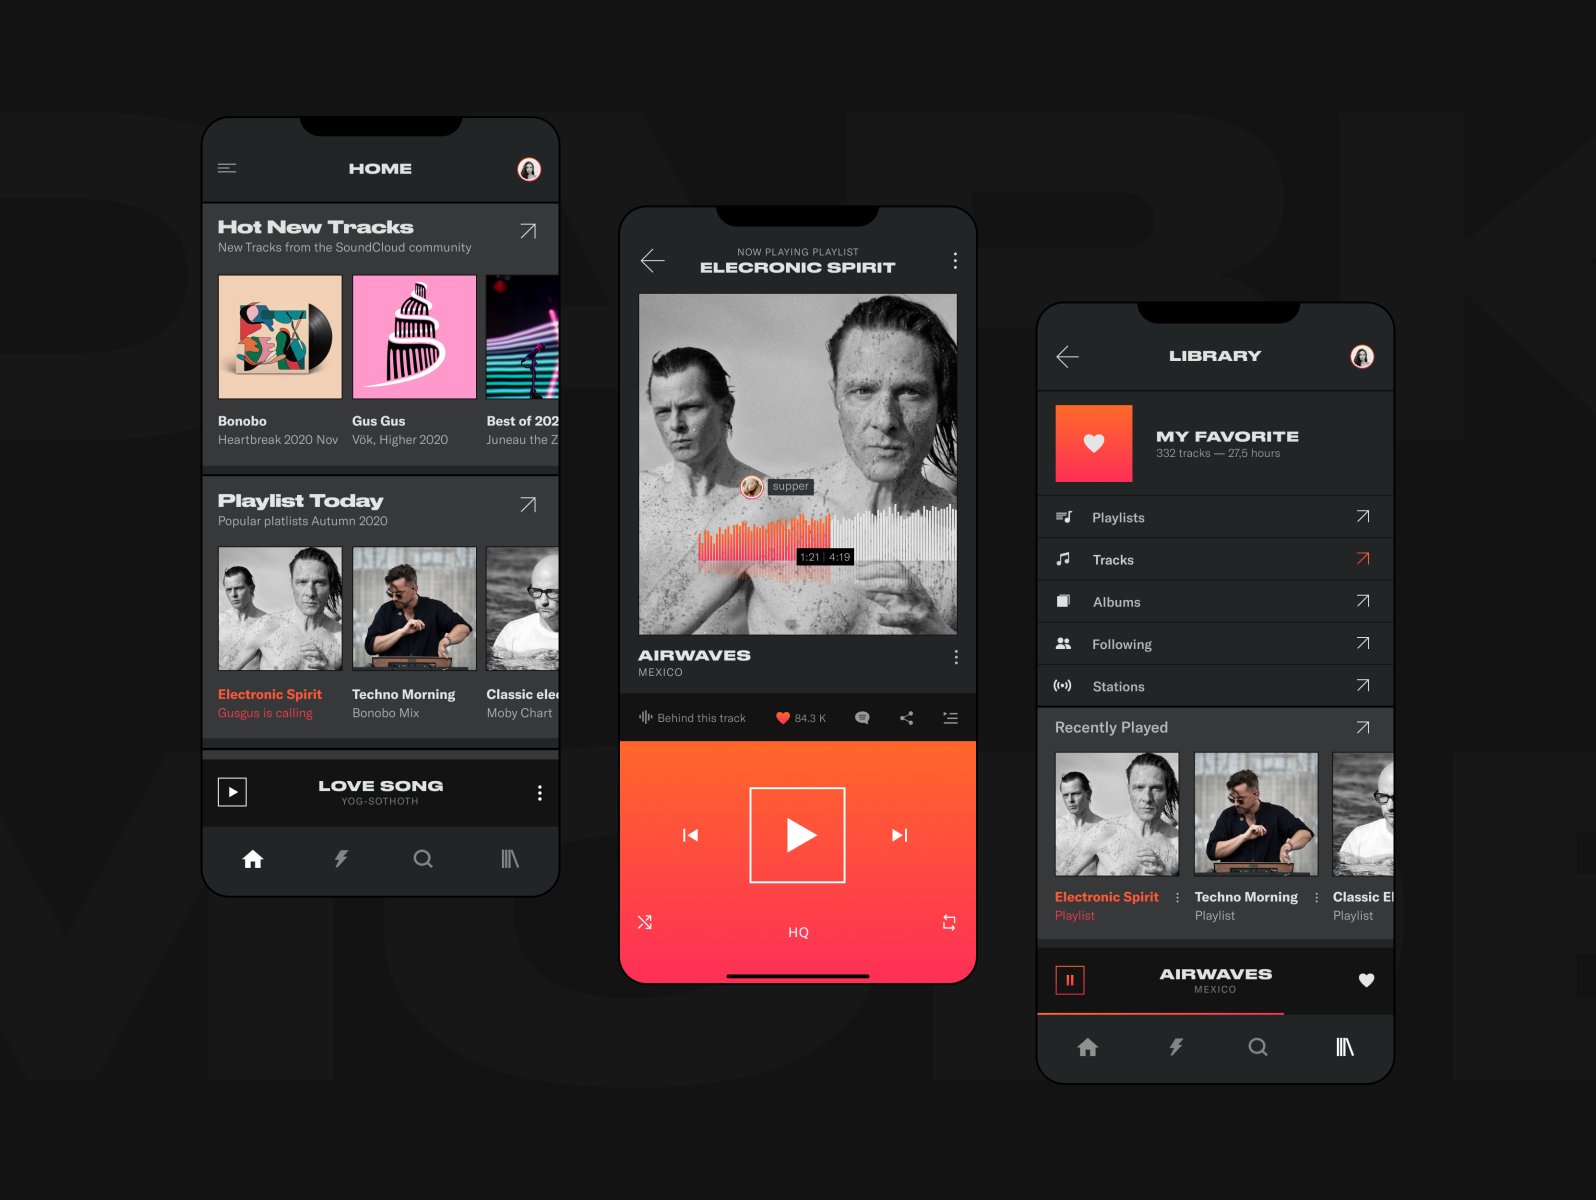 SoundCloud Redesign – Dark mode app 05 by Yasna Astanina on Dribbble